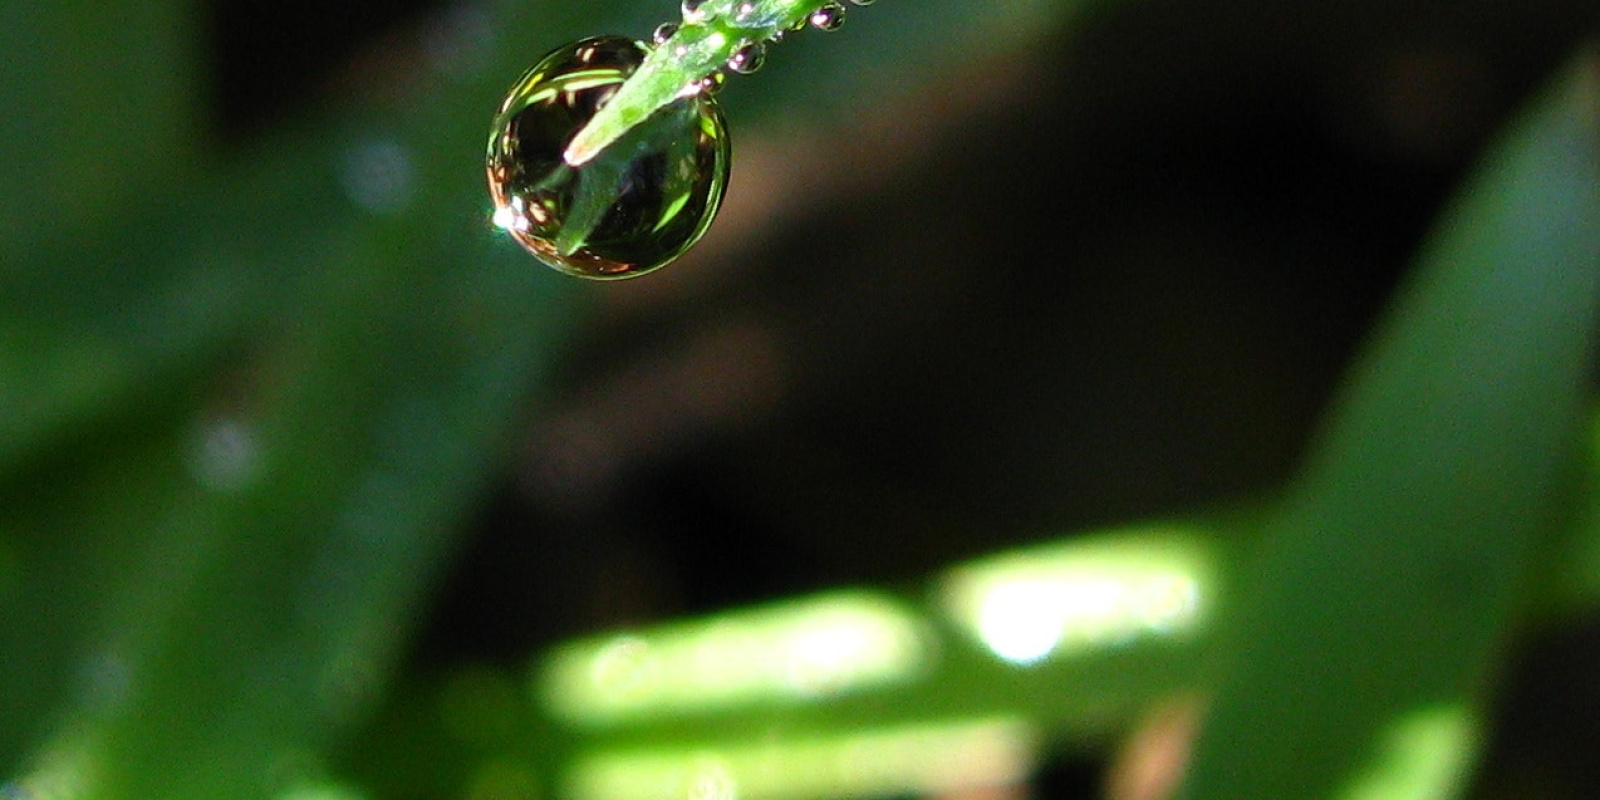 A large waterdrop is bending the tip of a grass leaf